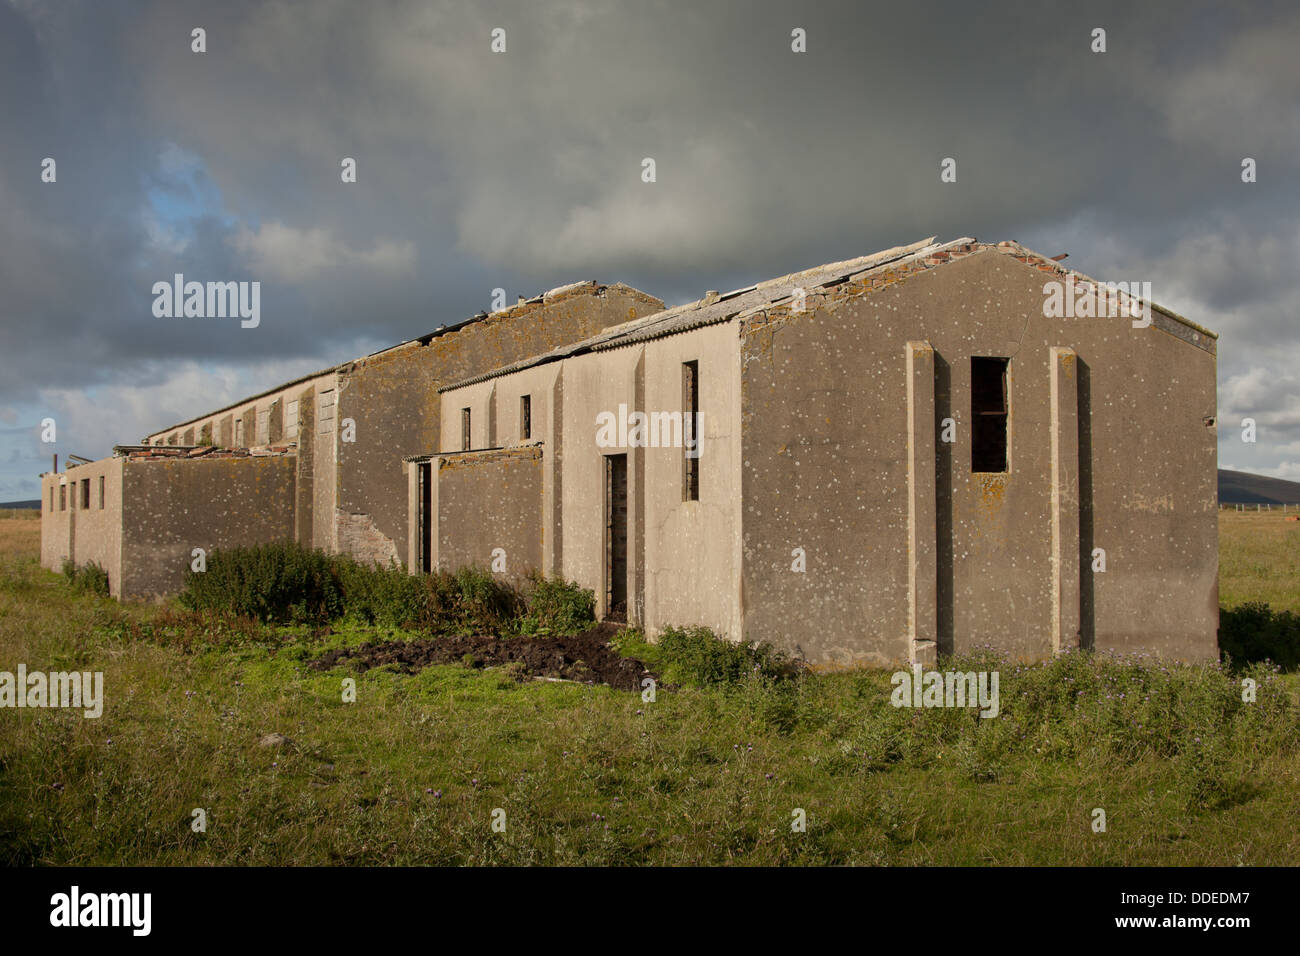 World war two building which was part of HMS Tern, Birsay, on the island of Orkney, Scotland UK. Stock Photo